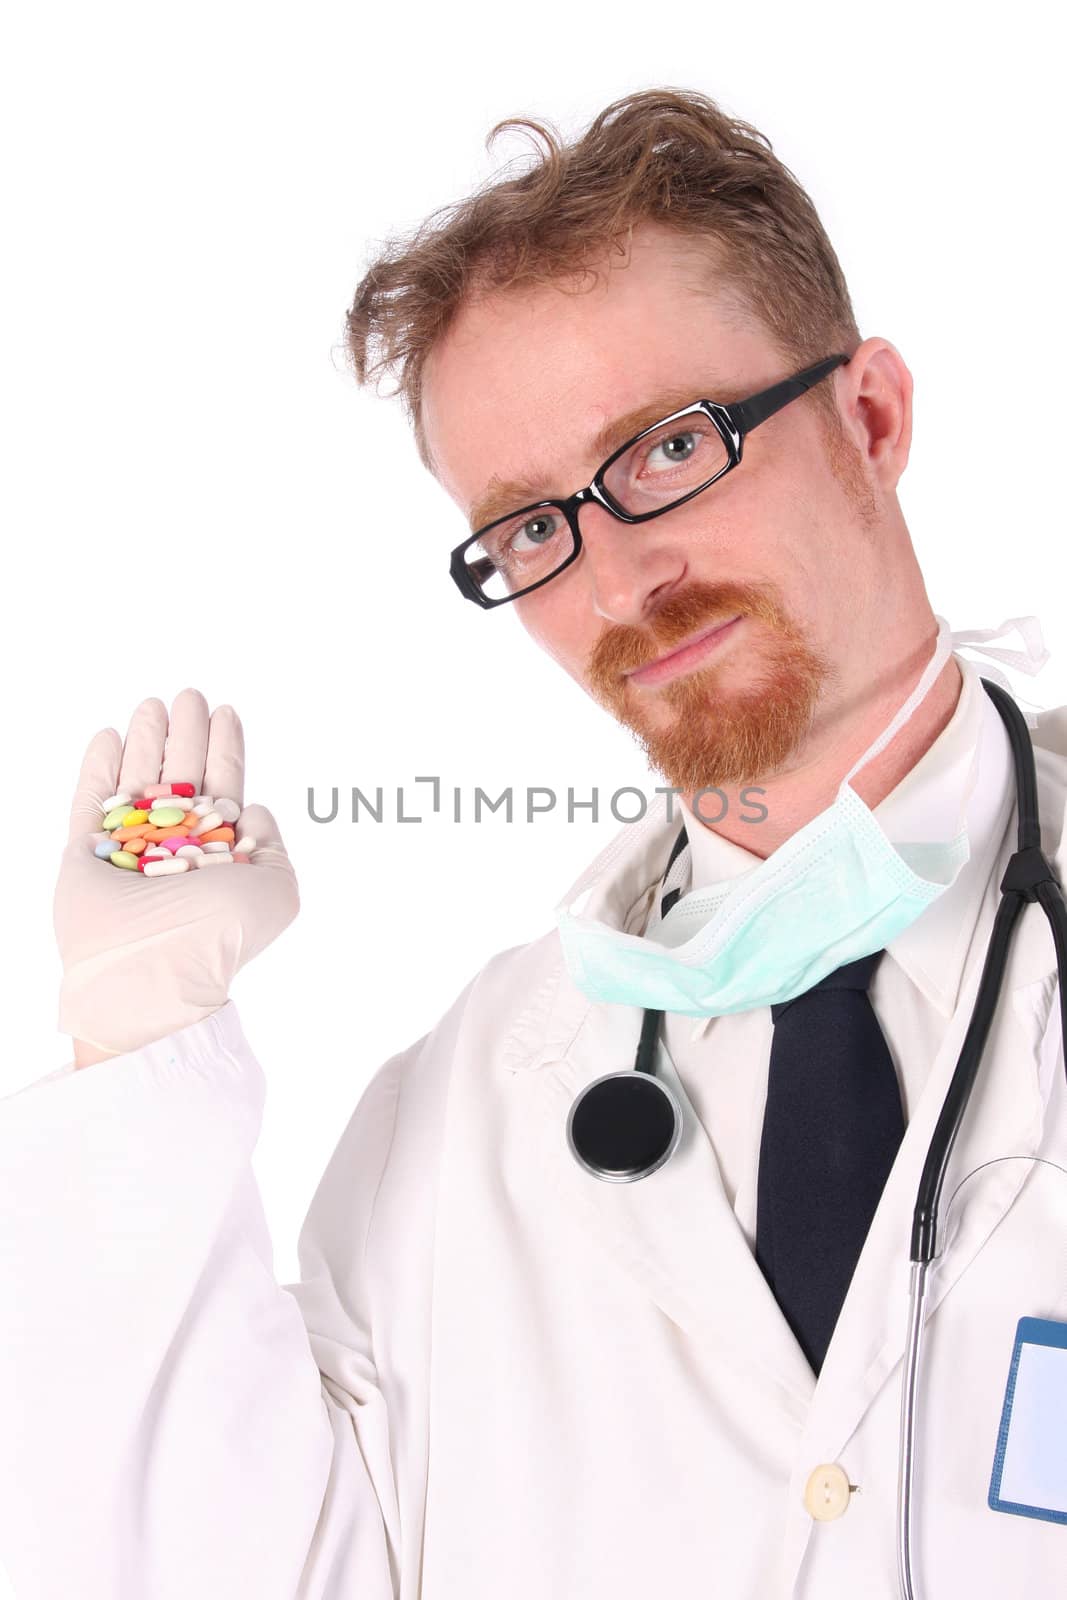 doctor with tablets on white background